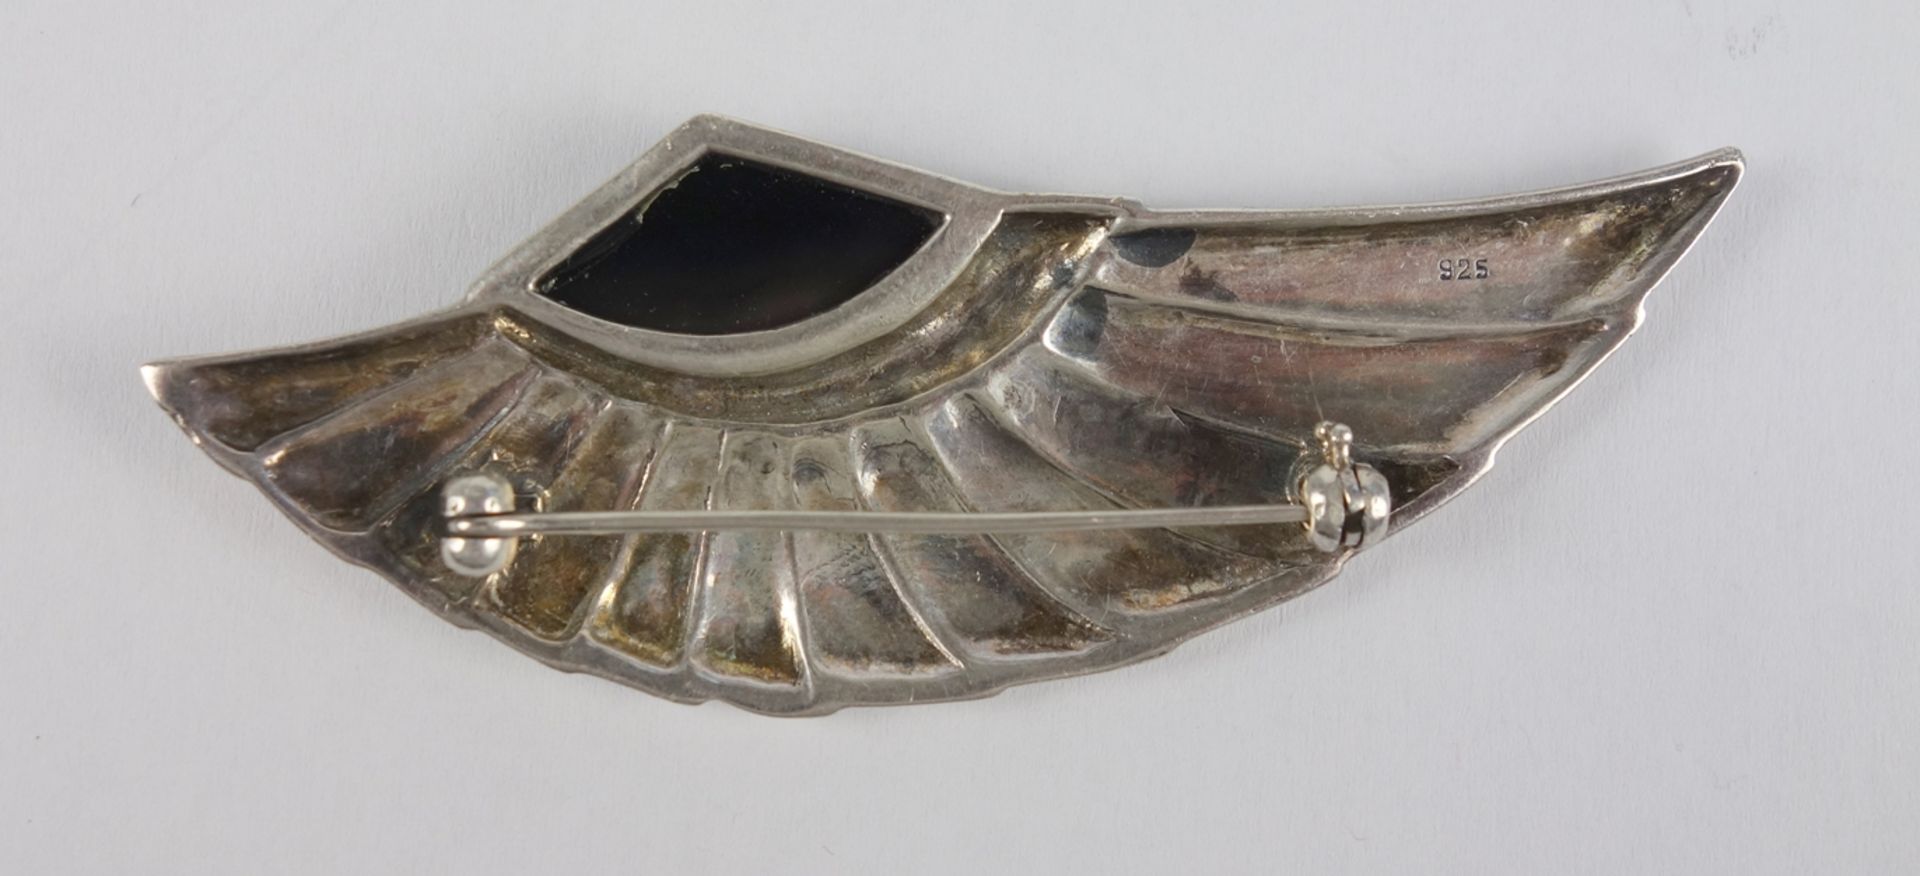 large brooch with onyx in art deco style, 925 silver, w.17,73g - Image 2 of 2